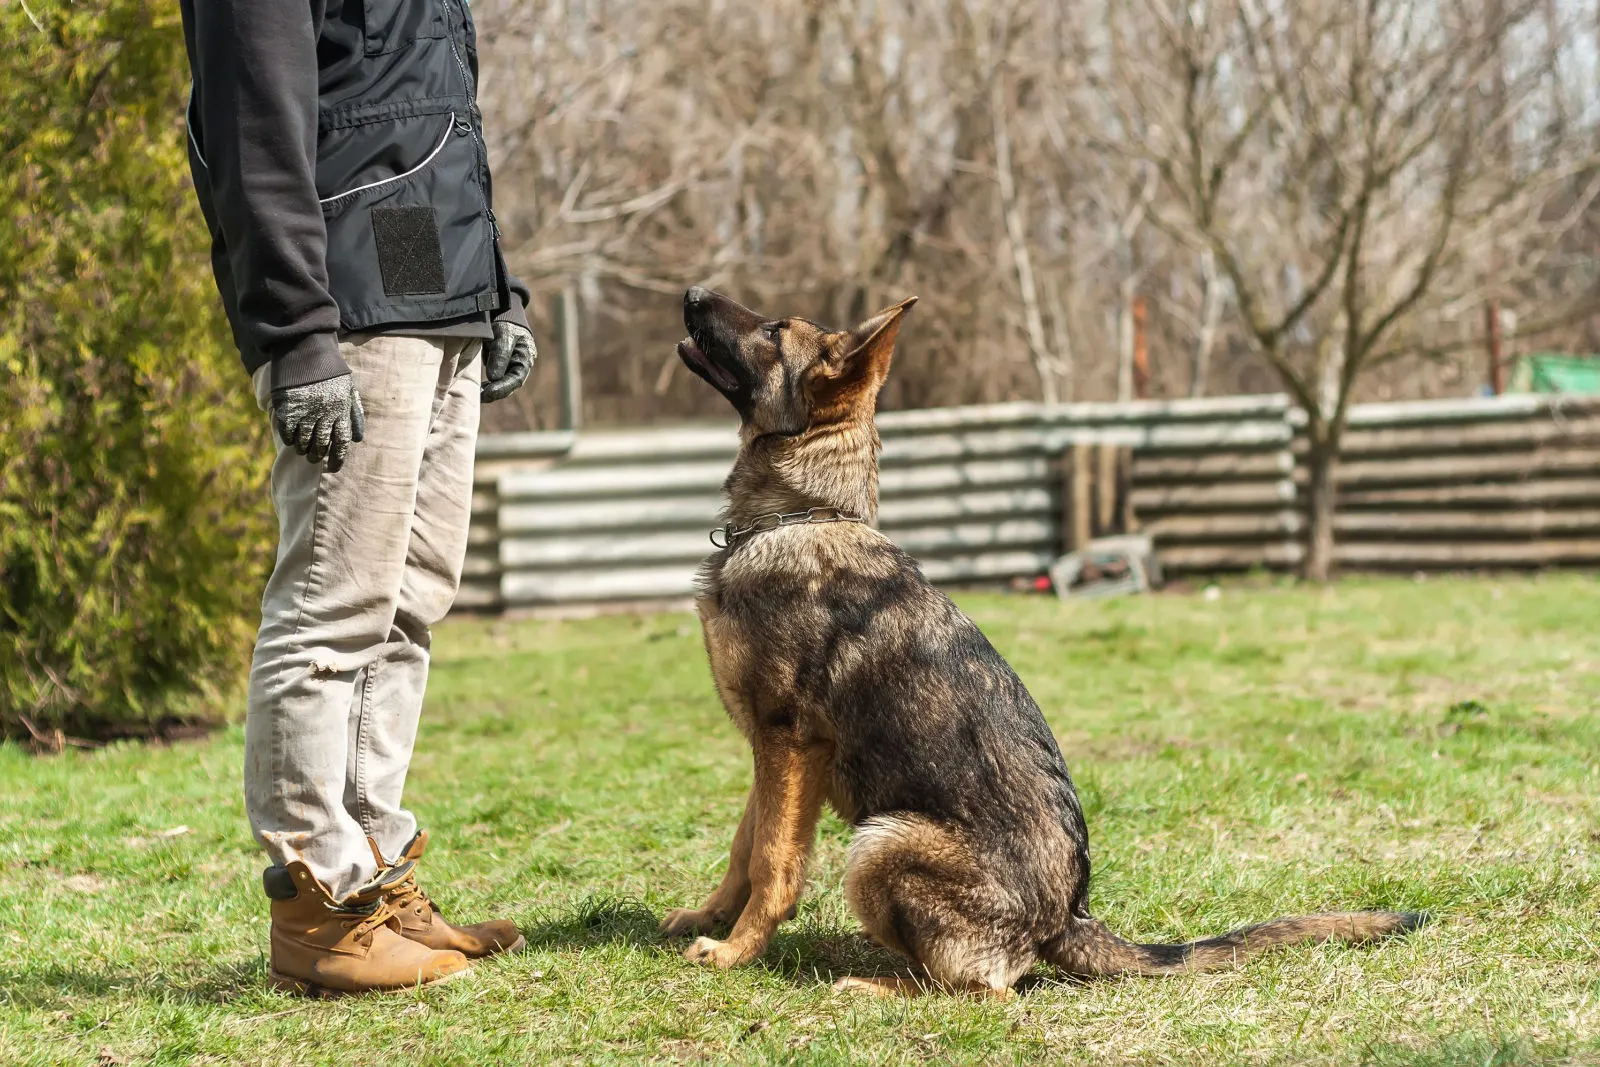 A german shepherd puppy trained by a dog trainer in a green environment at a sunny springtime.